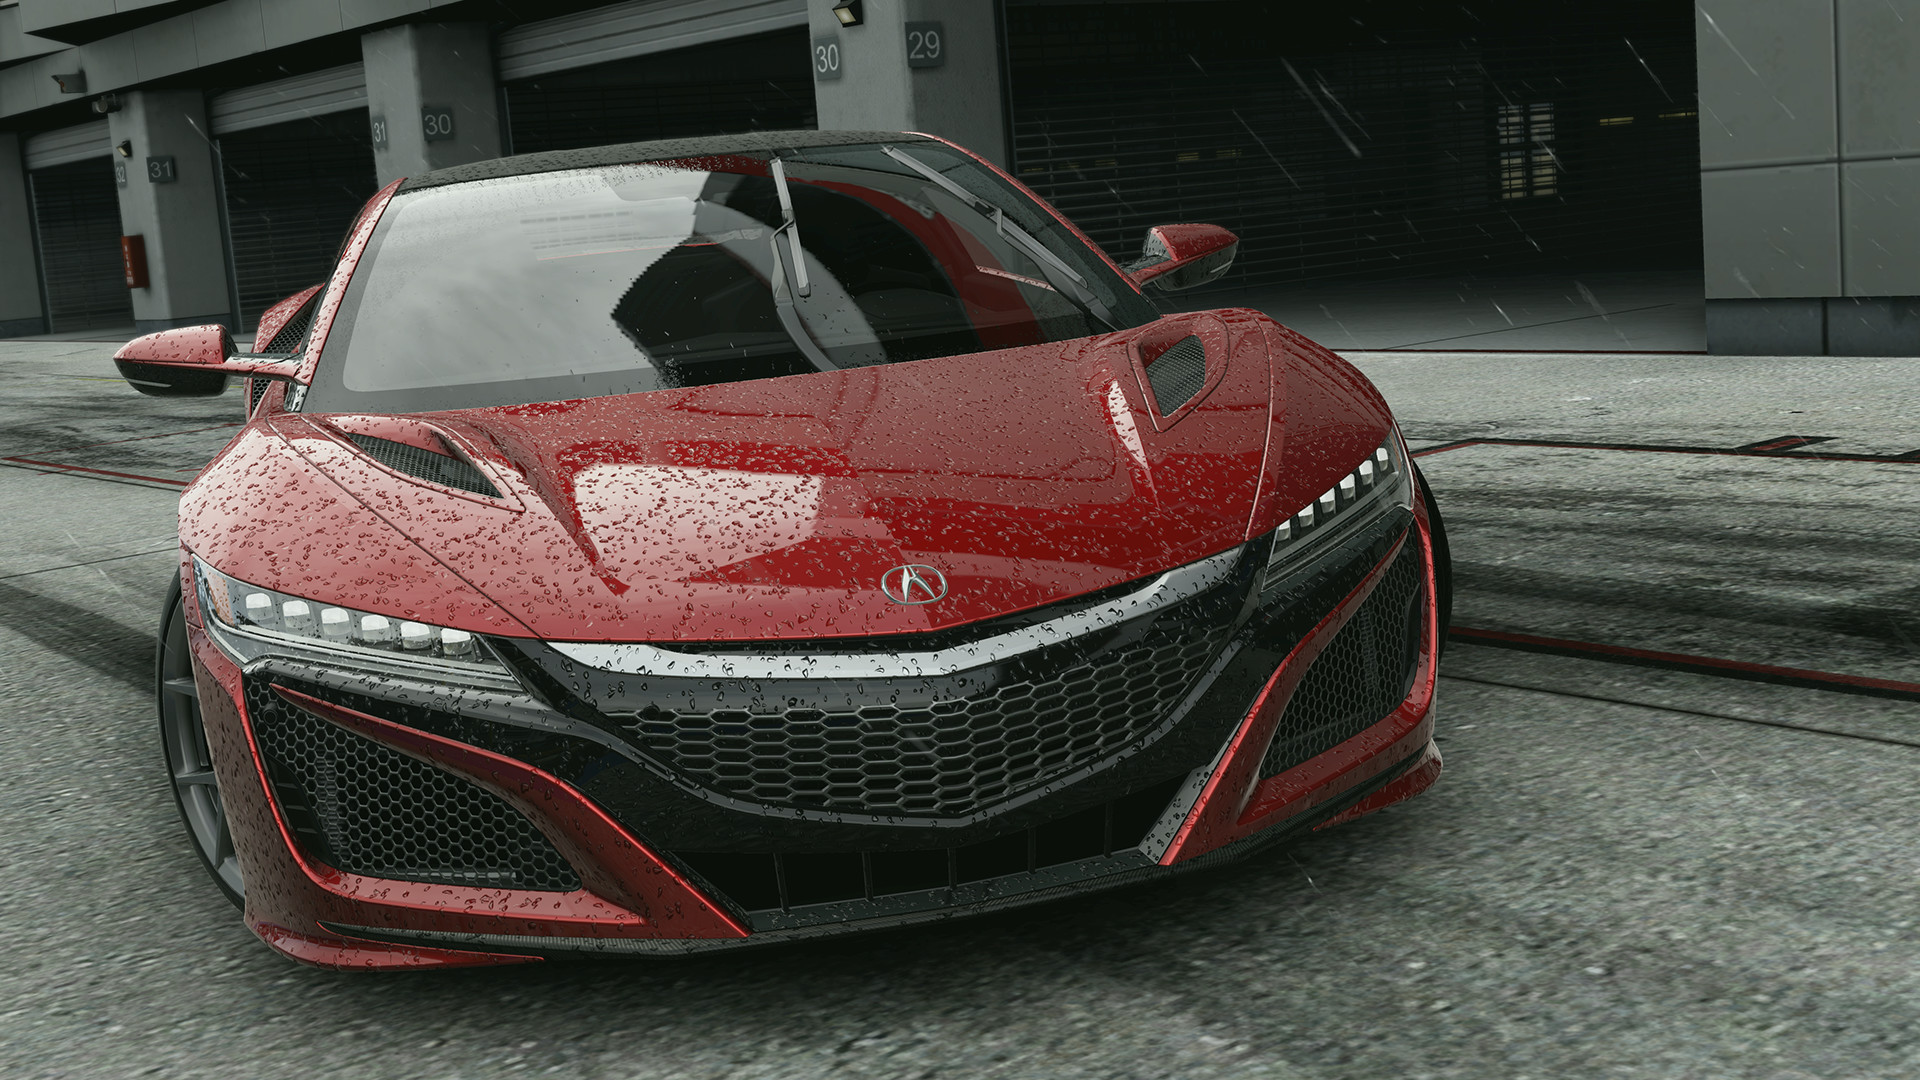 project cars 3 mods